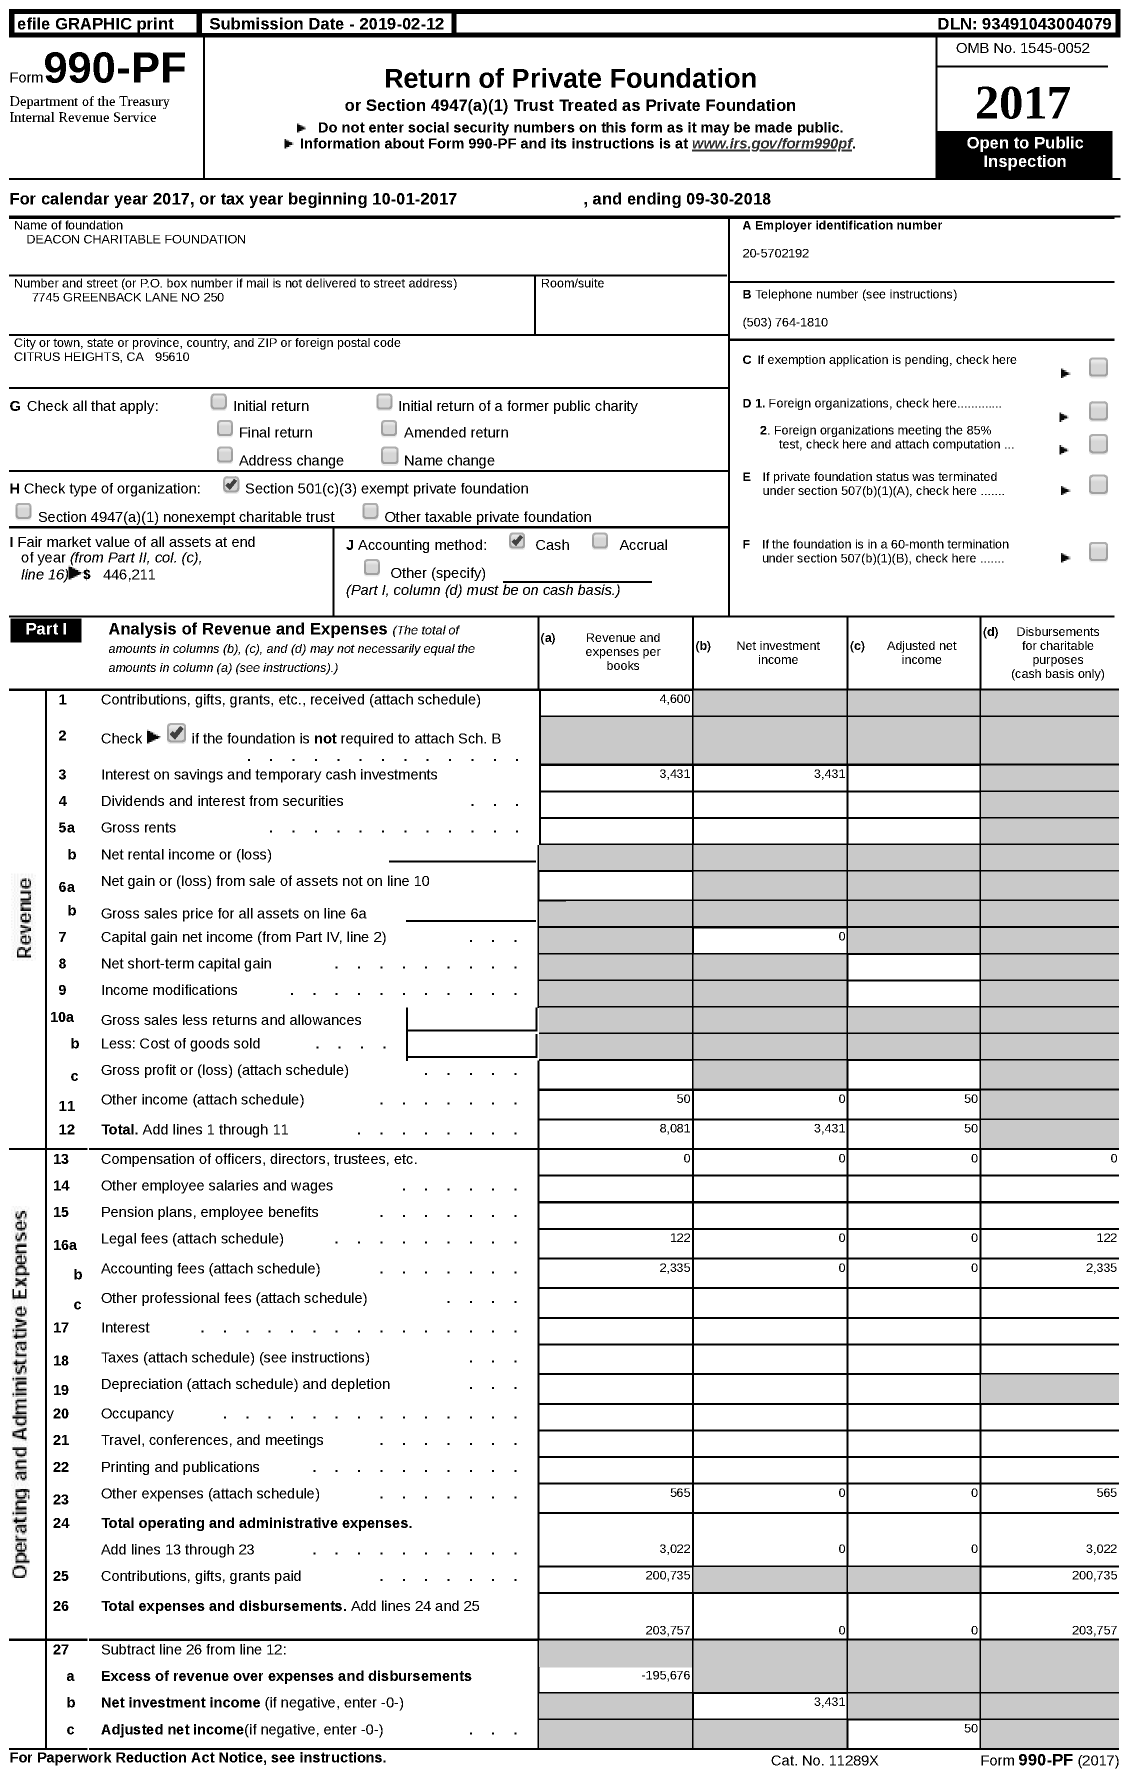 Image of first page of 2017 Form 990PF for Deacon Charitable Foundation